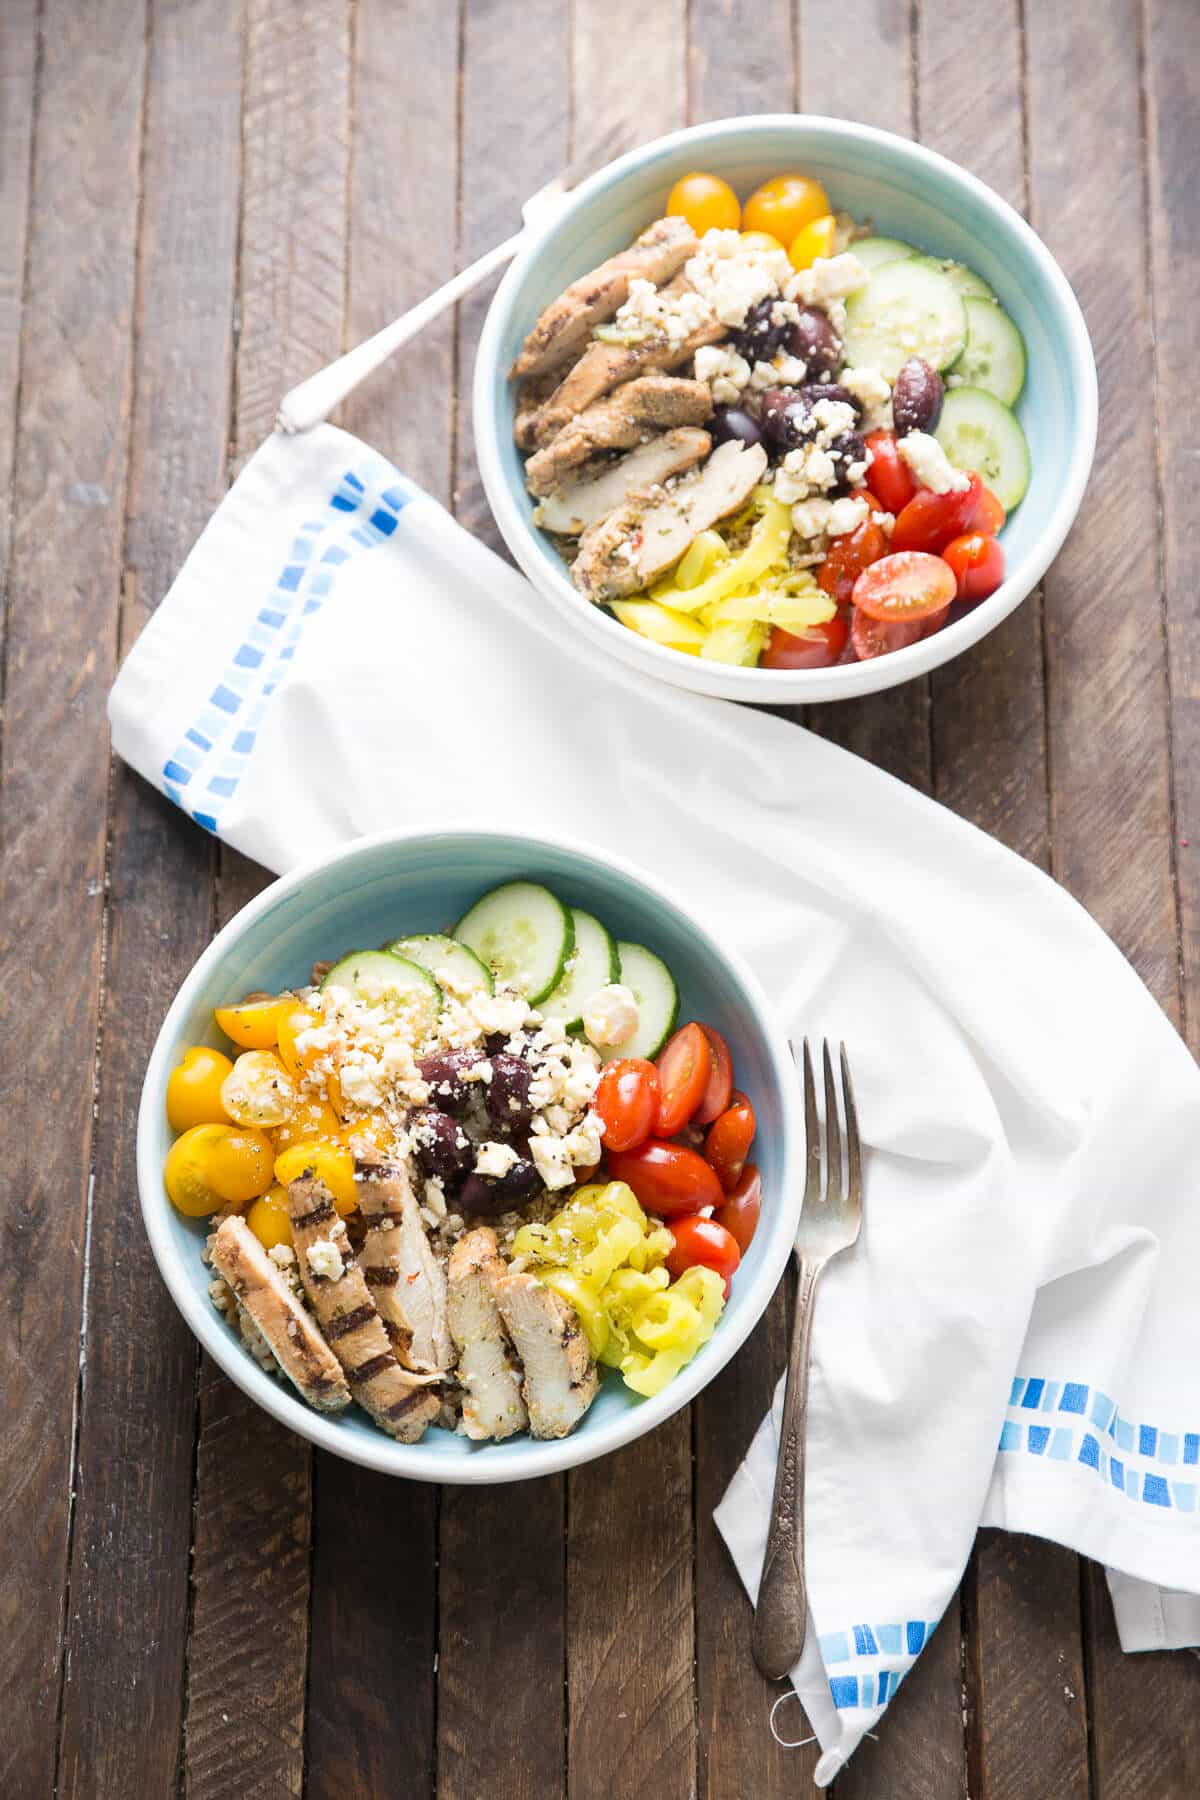 This Mediterranean chicken bowl is filled with nothing but goodness! This is a meal you can feel good about! lemonsforlulu.com